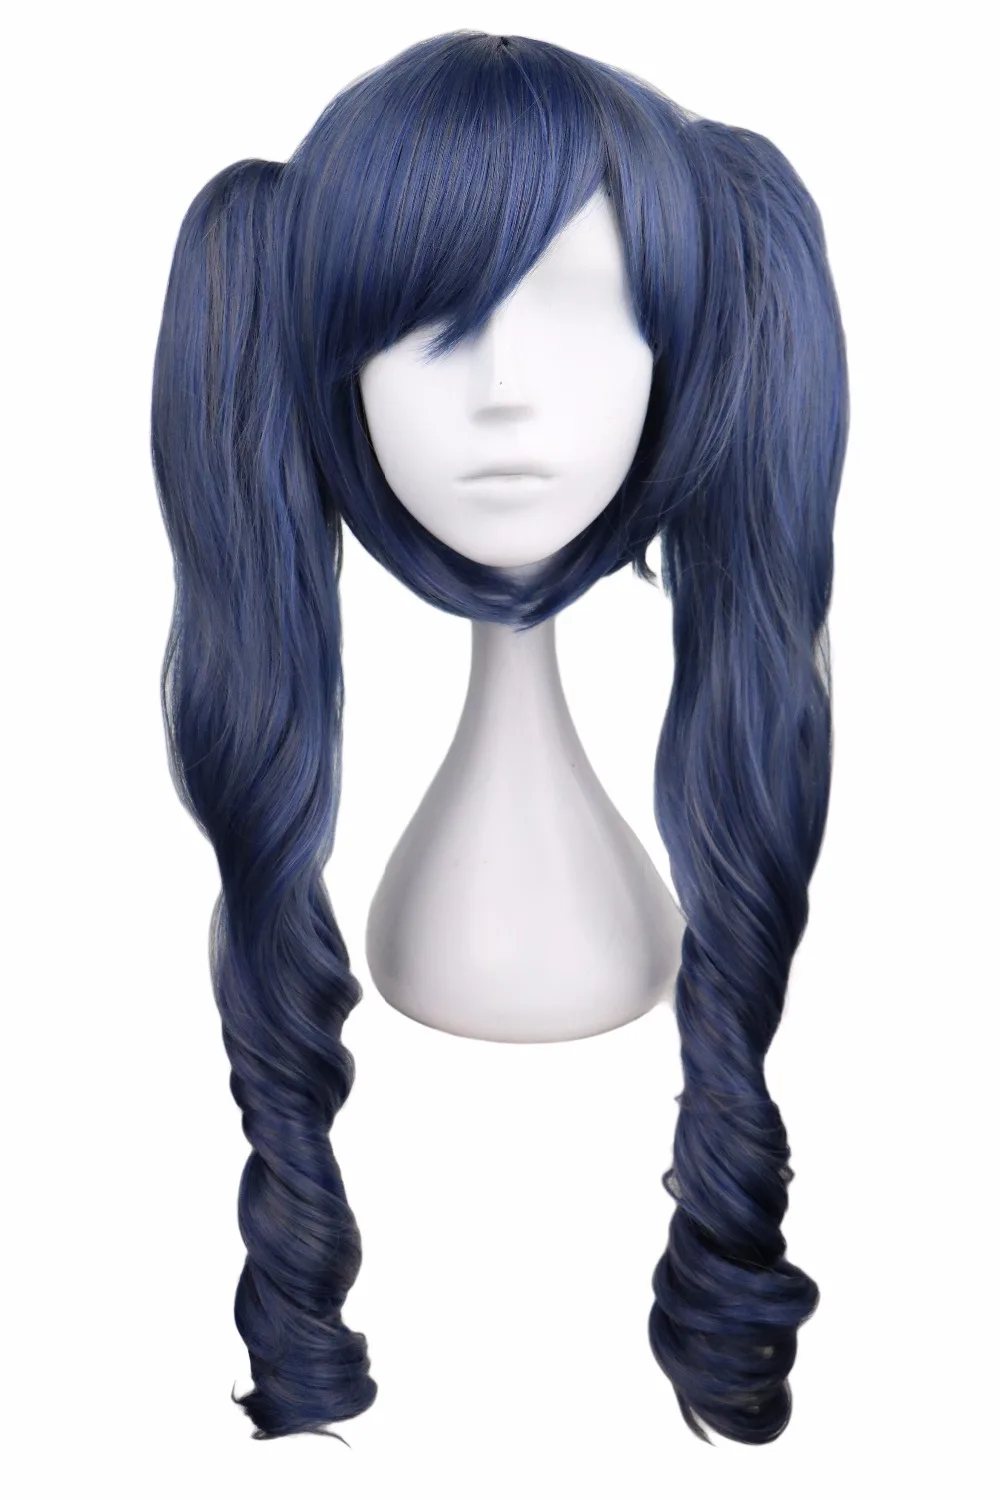 QQXCAIW Long Wavy Cosplay Black Butler Mixed Blue Gray Grey 70 Cm Synthetic Hair Wigs